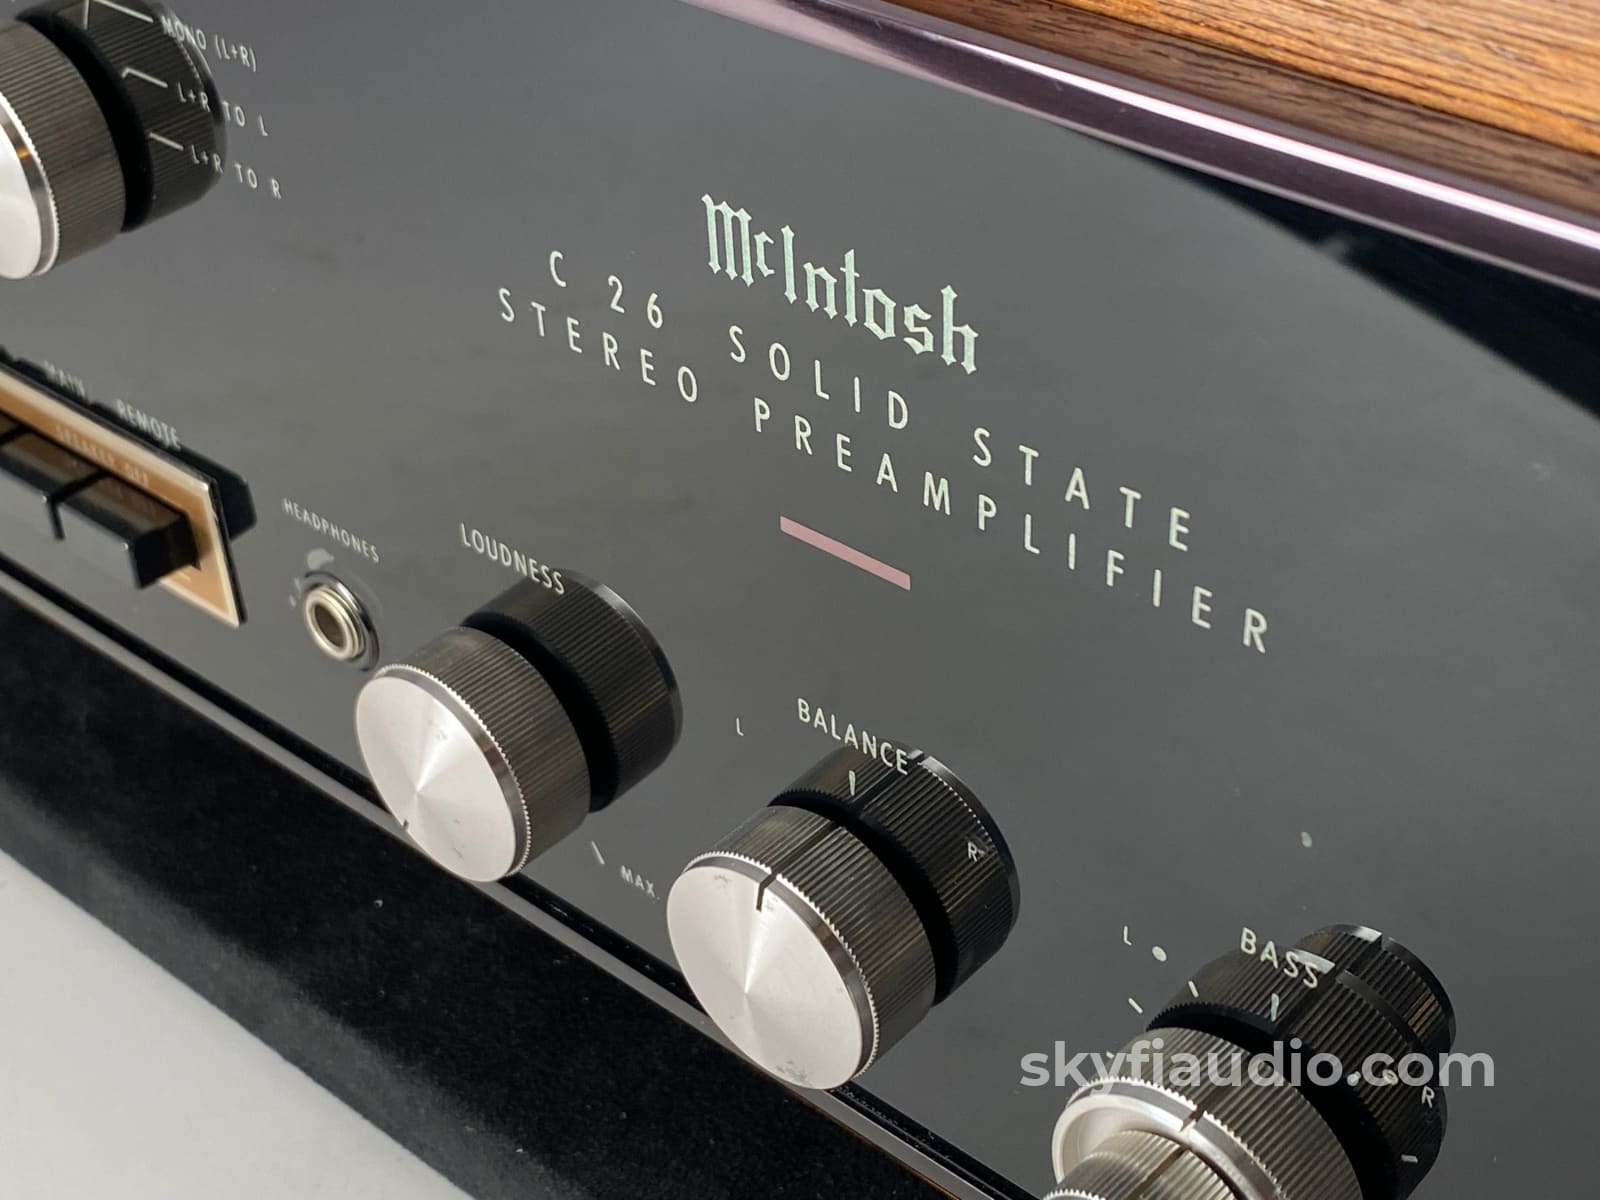 Mcintosh C26 Vintage Preamp In Gorgeous Wood Case Serviced Preamplifier